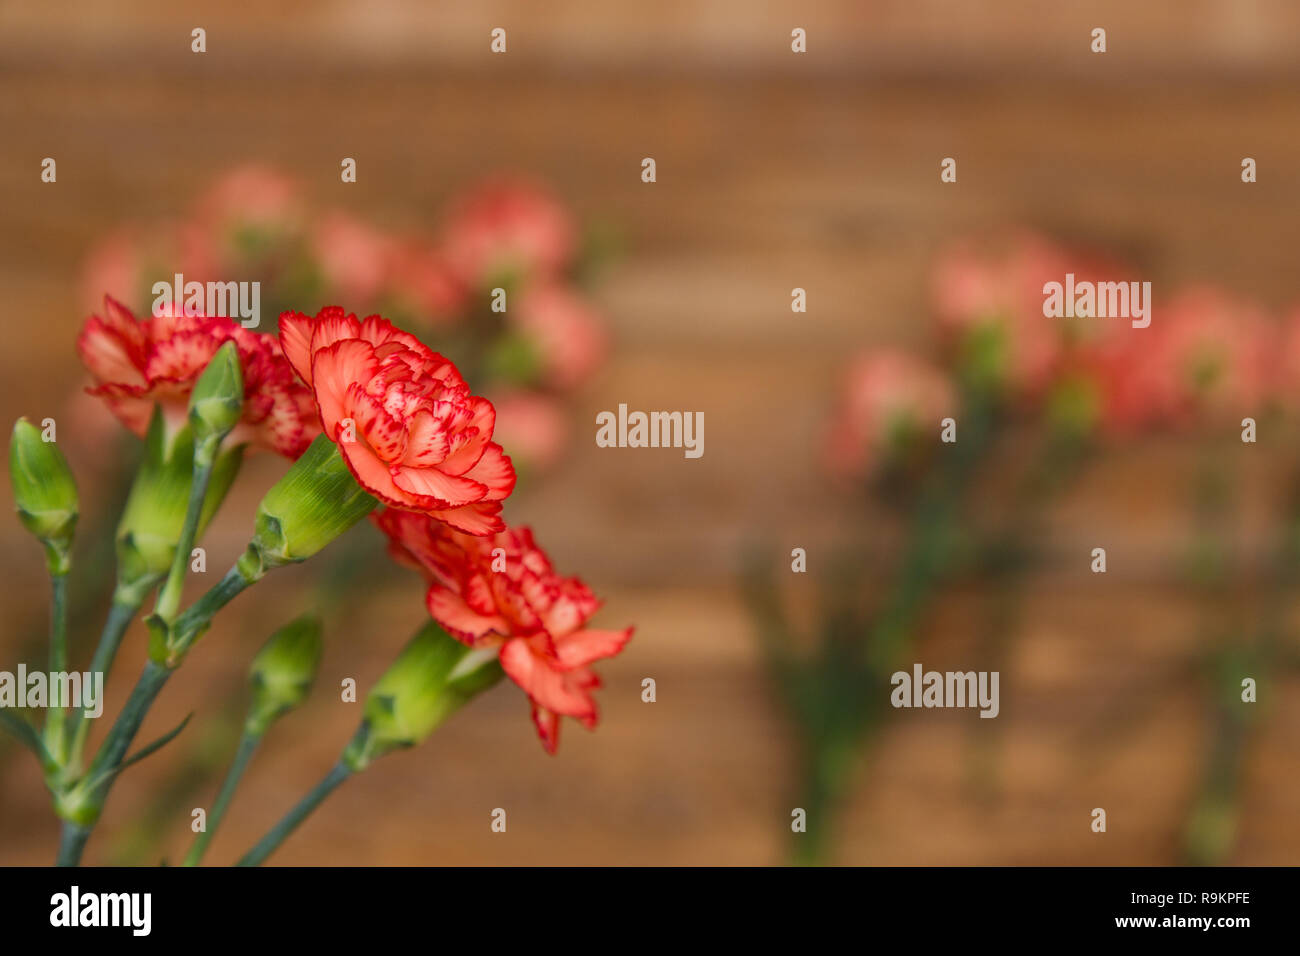 A bunch of red and pink cloves flowers on a rustic wooden table. Blur background with copy space. Stock Photo